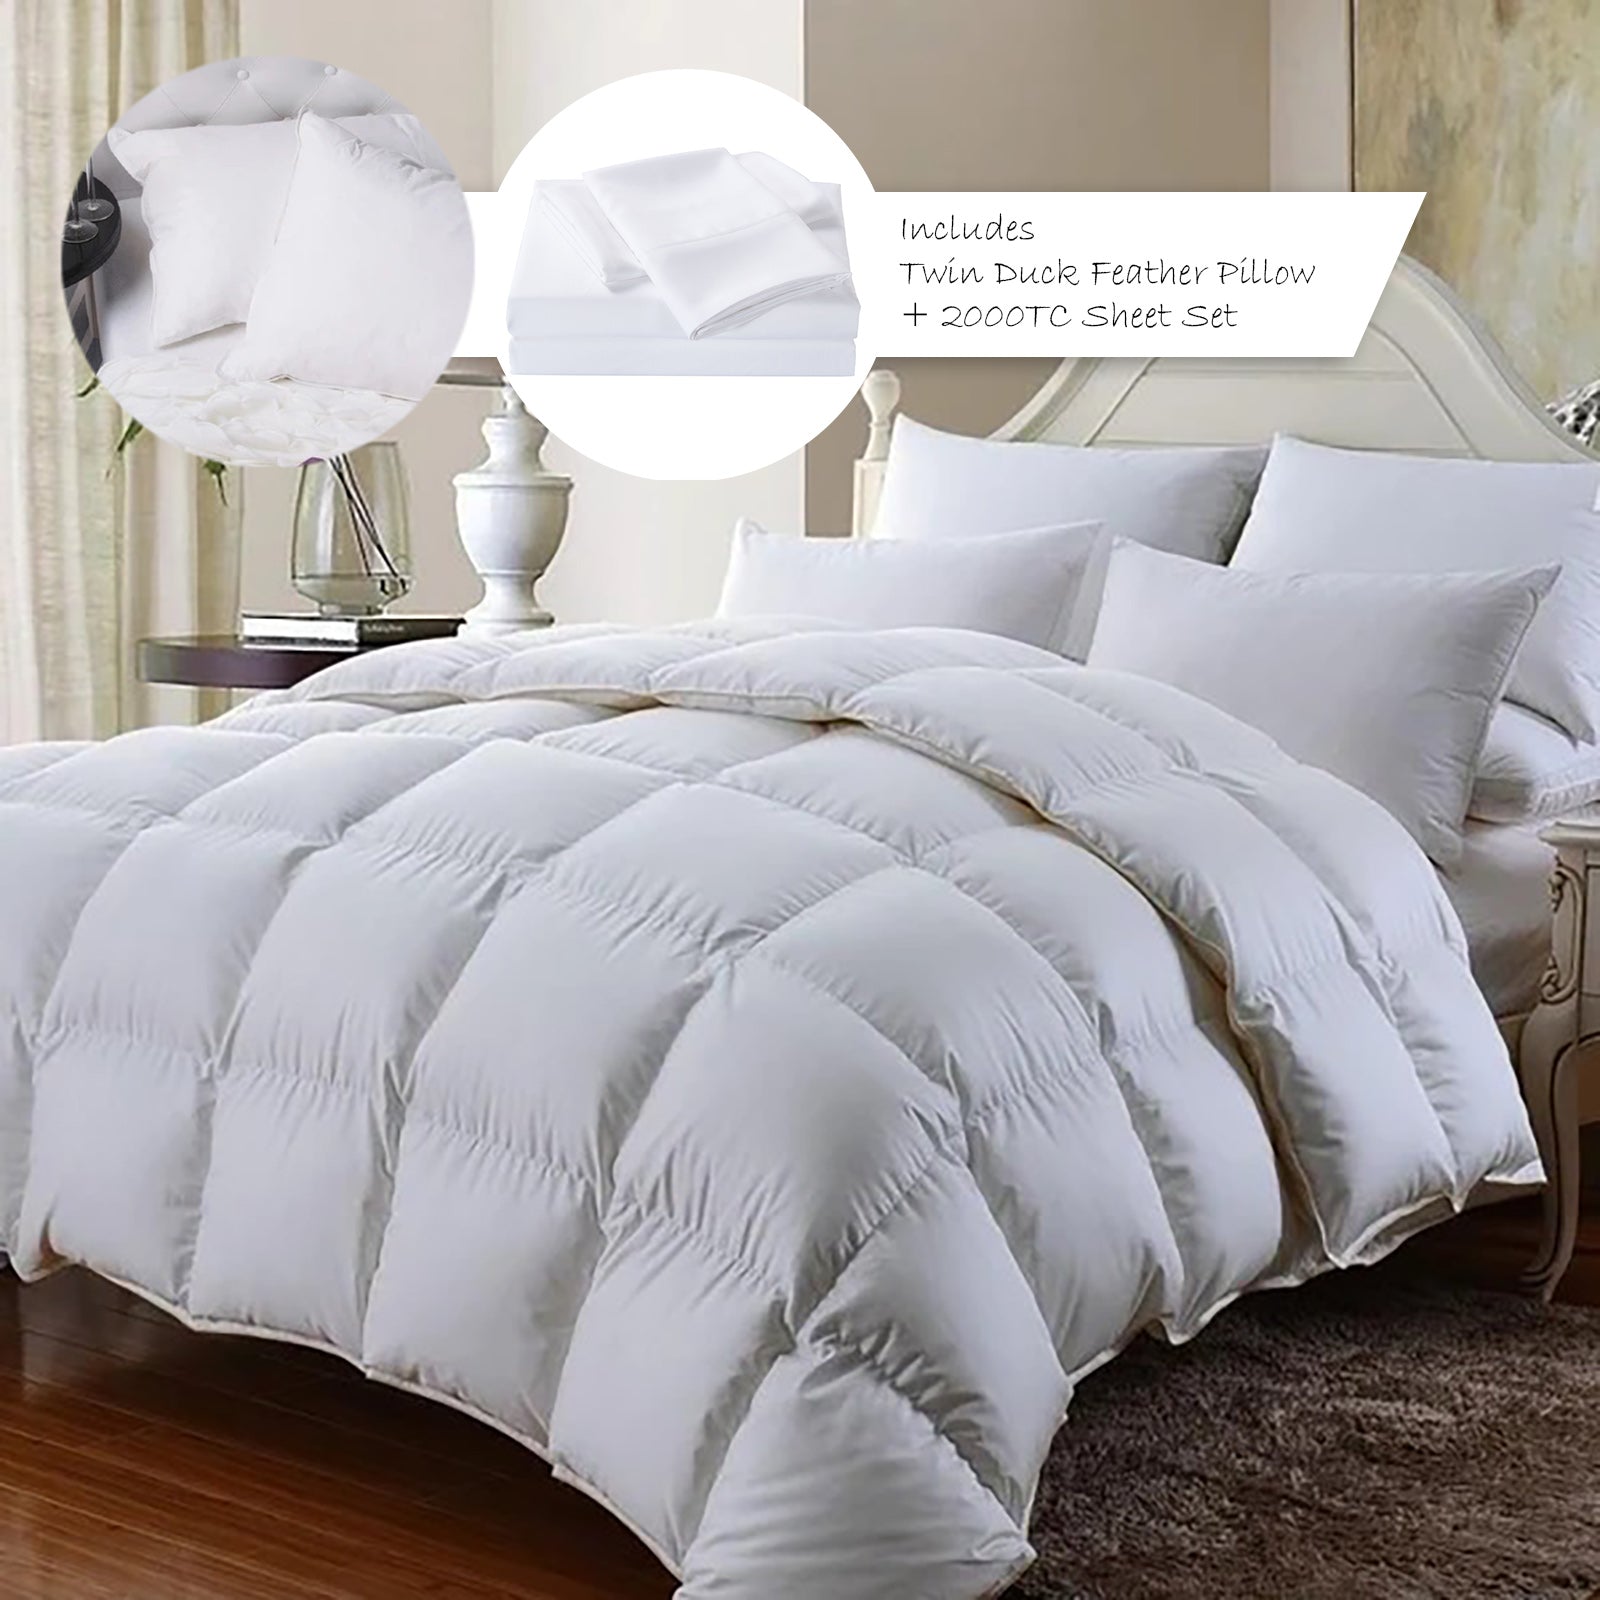 Royal Comfort 350GSM Bamboo Quilt, 2000TC Sheet Set And 2 Pack Duck Pillows Set Single White Deals499